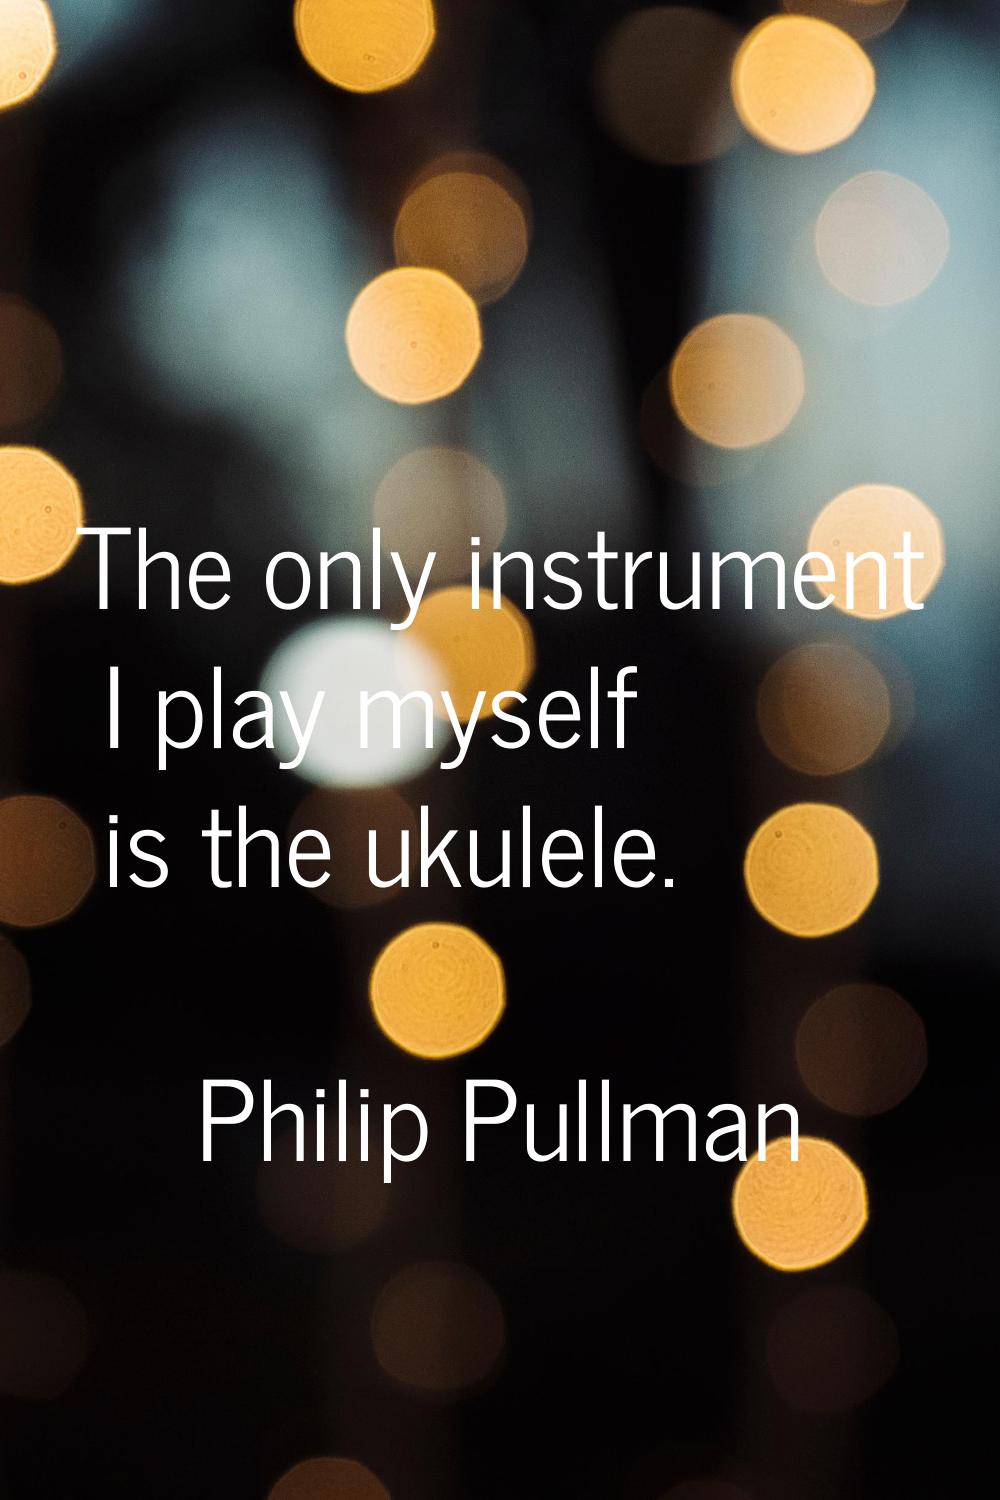 The only instrument I play myself is the ukulele.